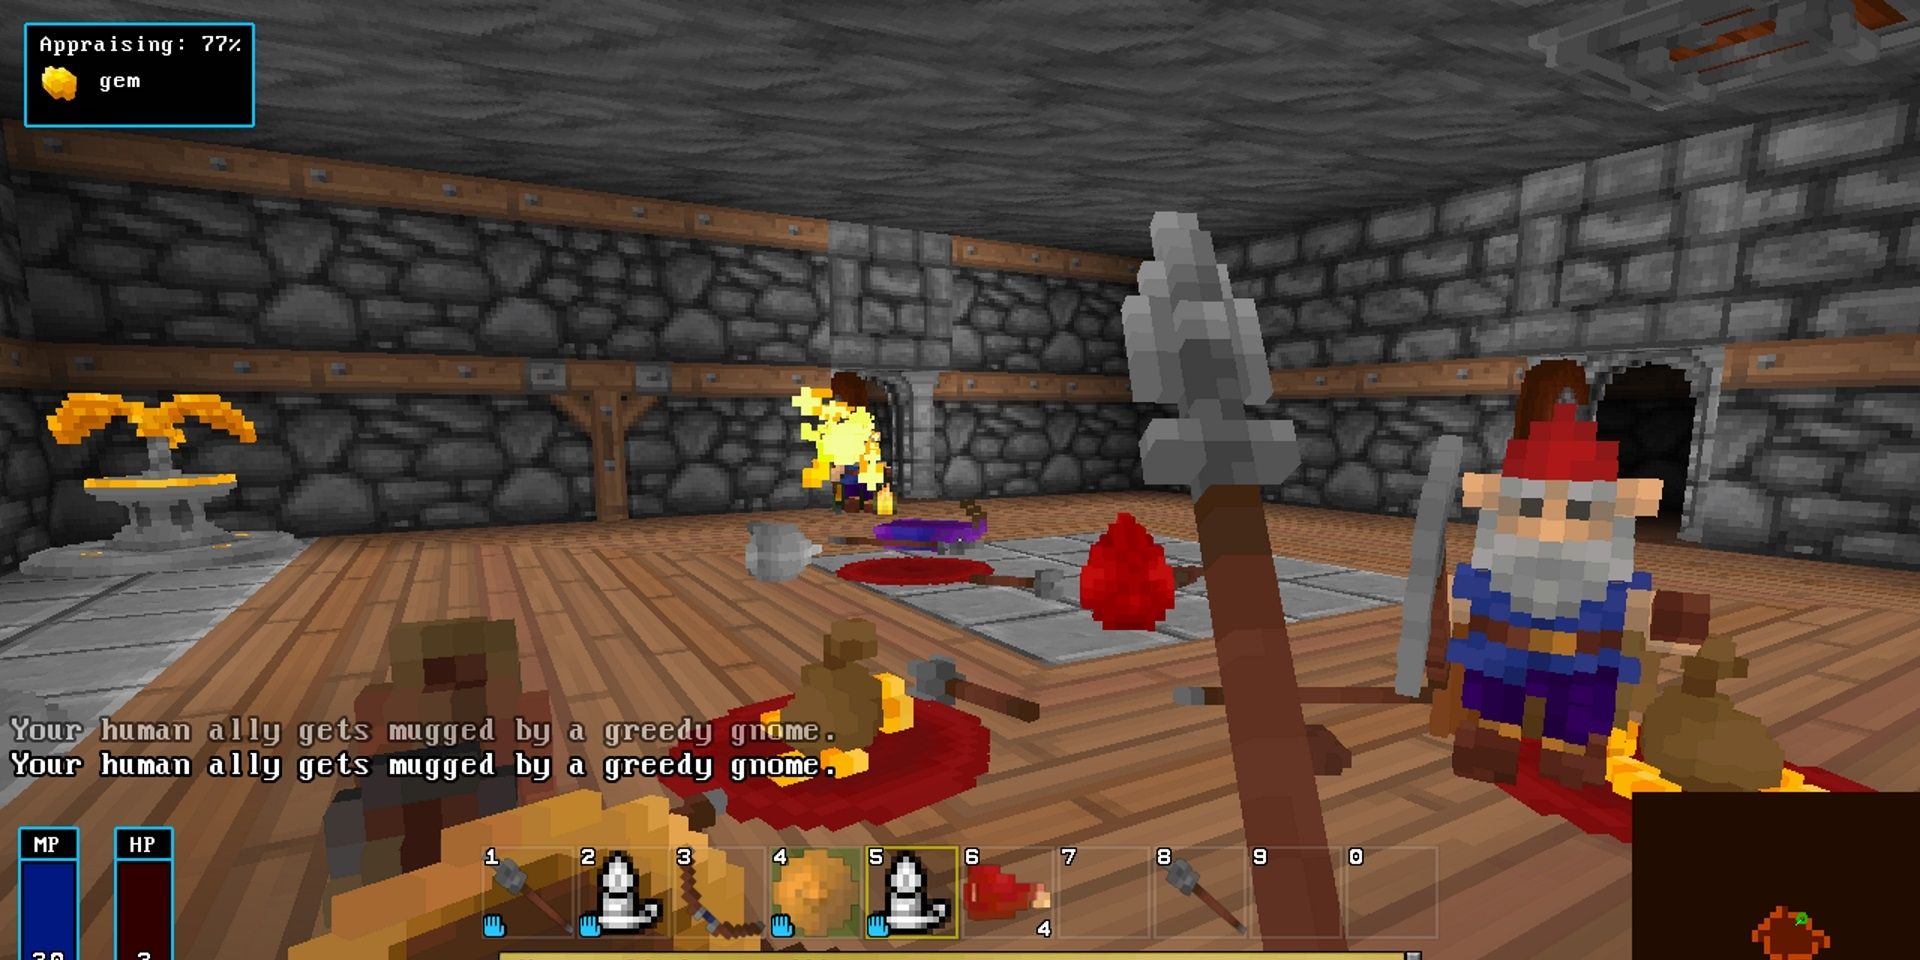 First-person view holding a weapon against a gnome with other enemies dead on the floor